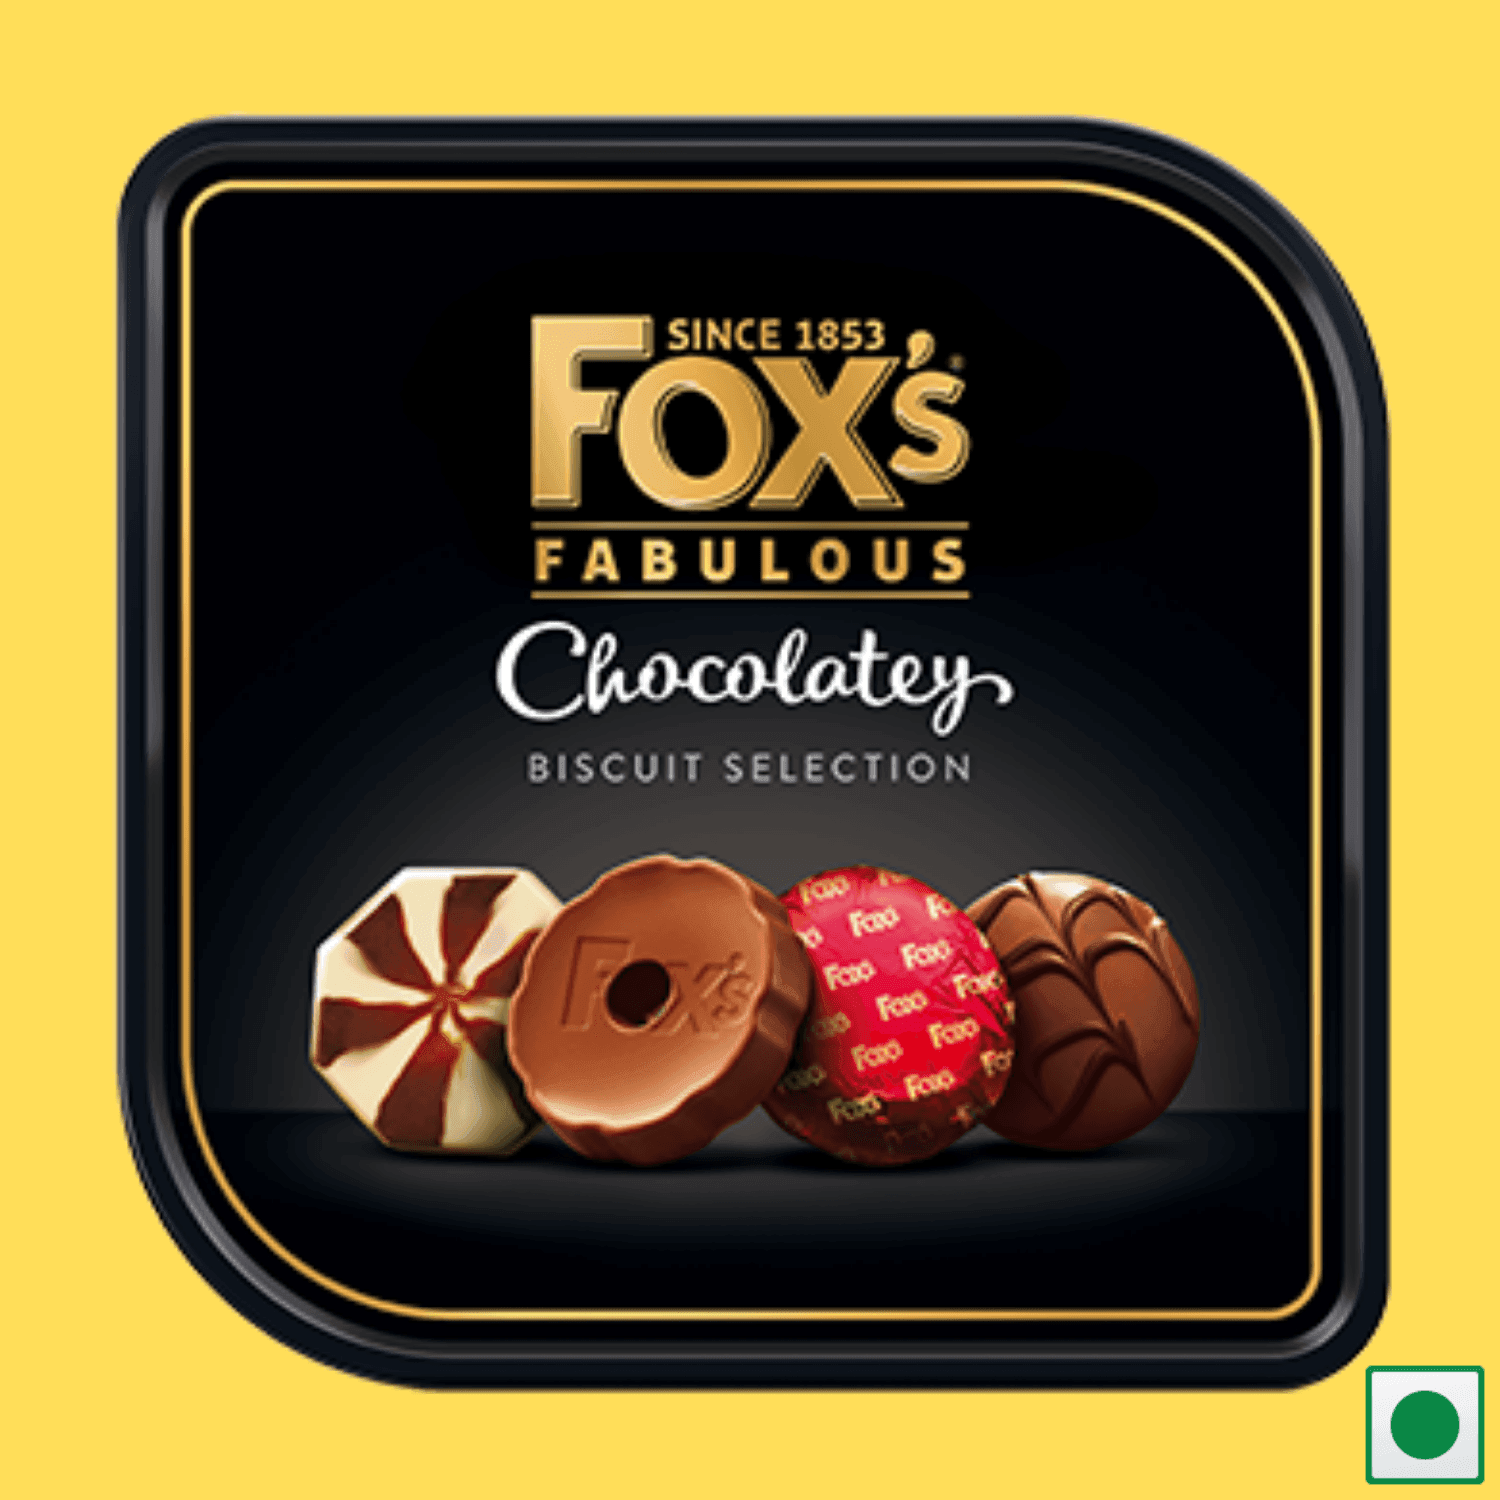 Fox's Fabulous Chocolatey Biscuit Selection, 365g (Imported) - Super 7 Mart